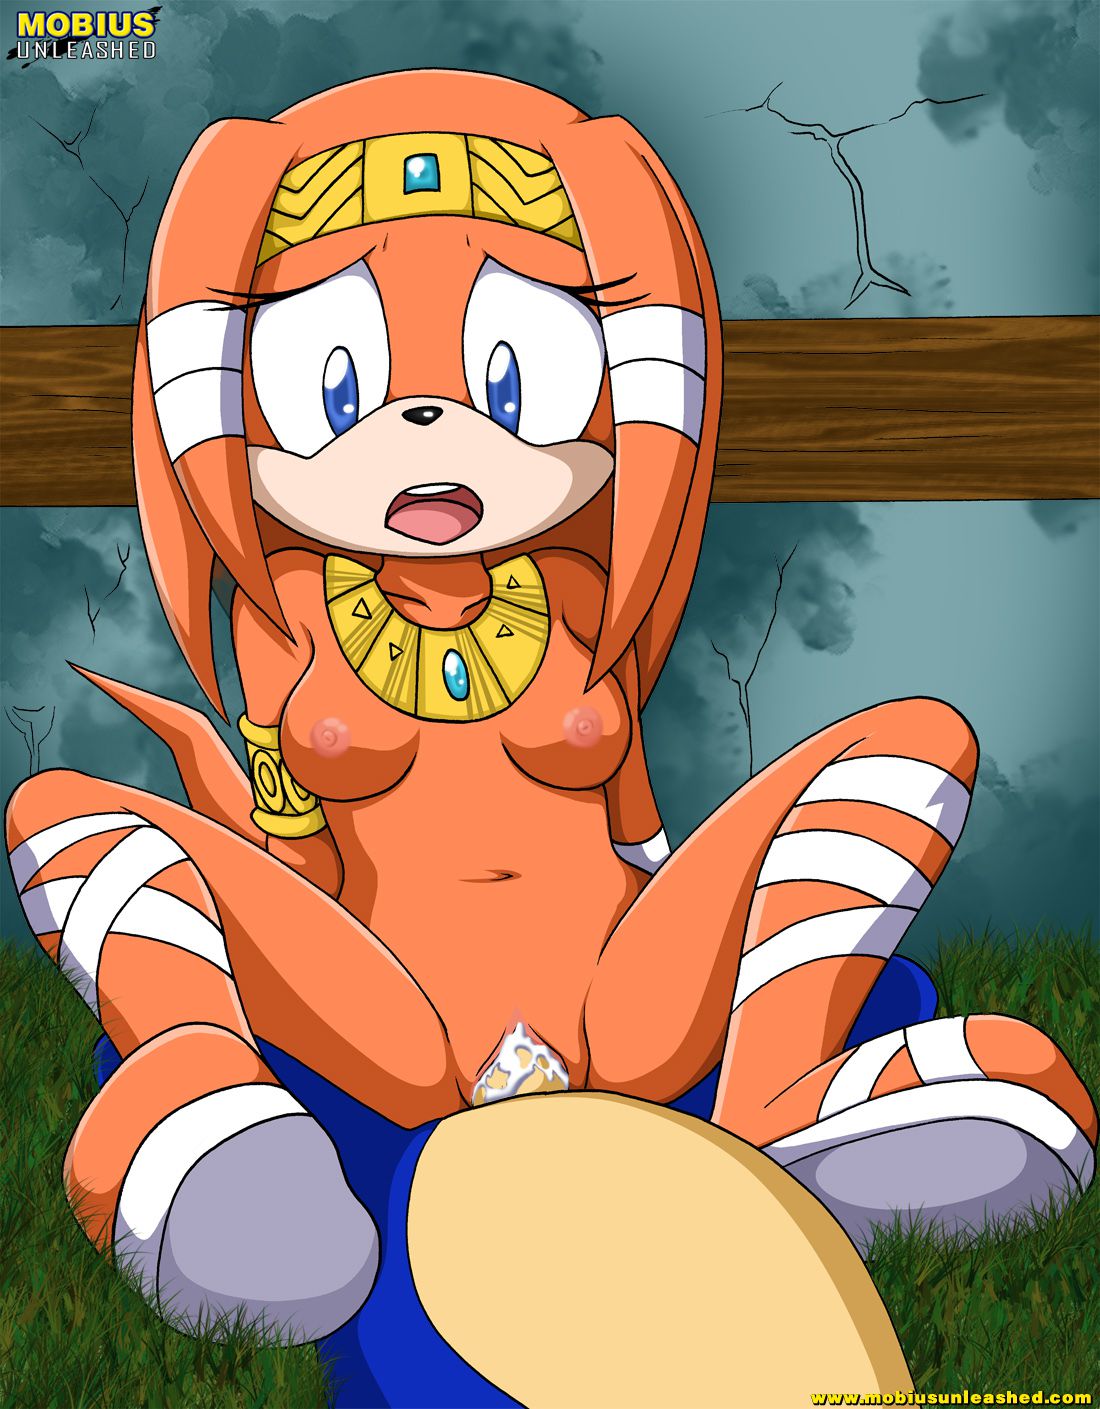 Mobius Unleashed: Tikal the Echidna 72